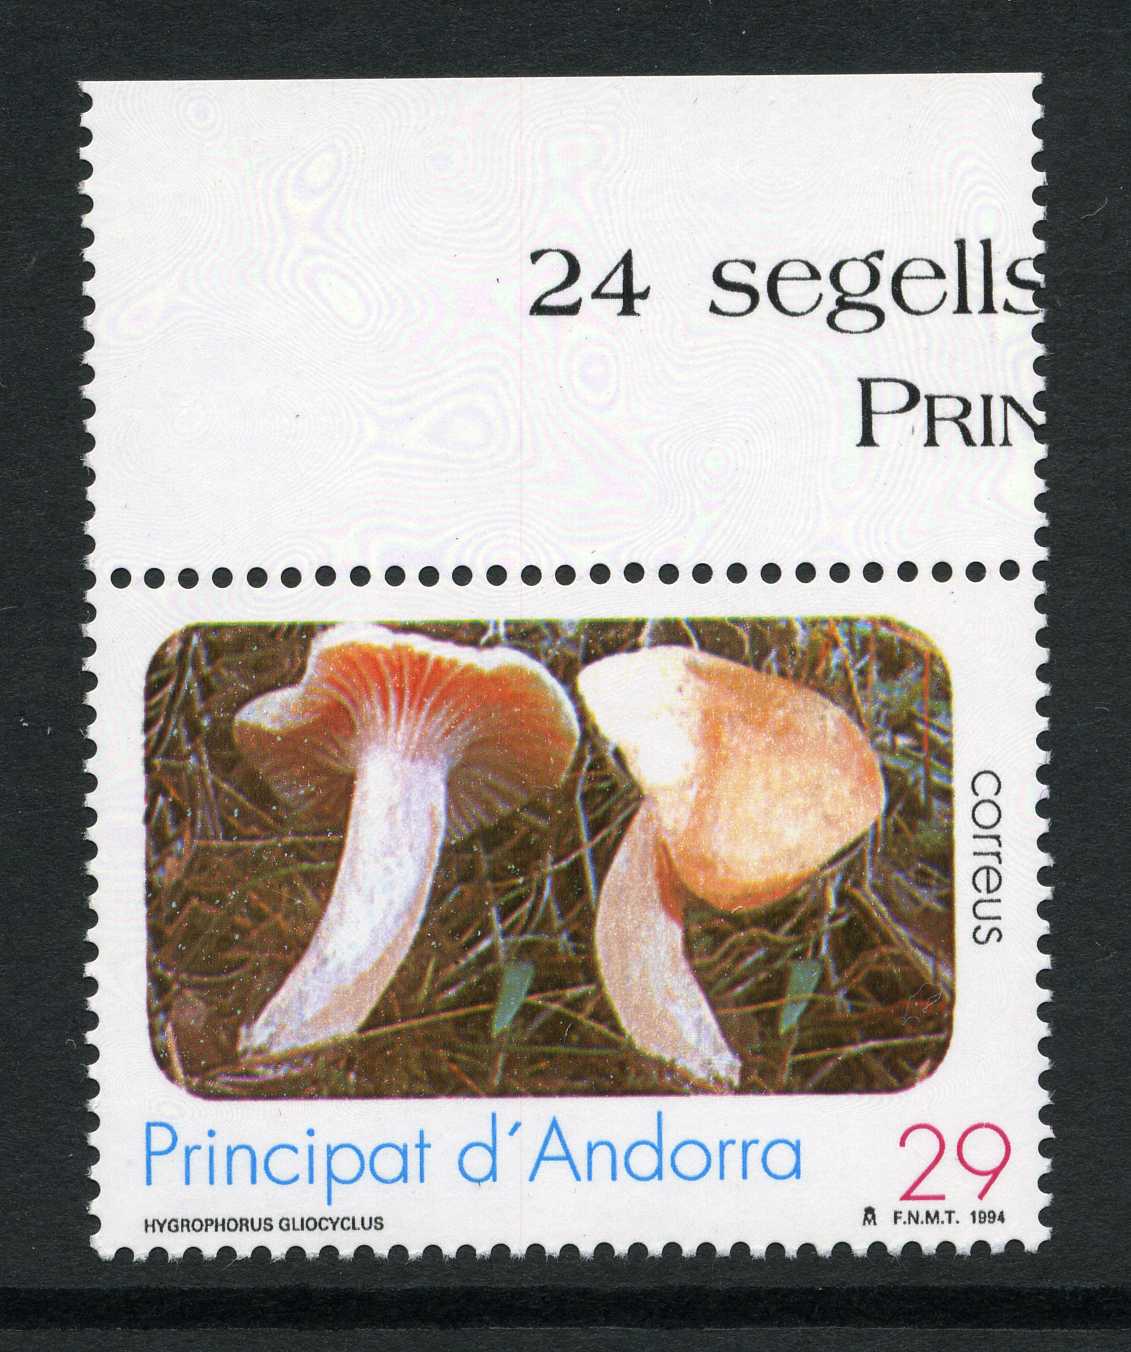 Fungi on Stamps: Afghanistan to British Virgin Islands